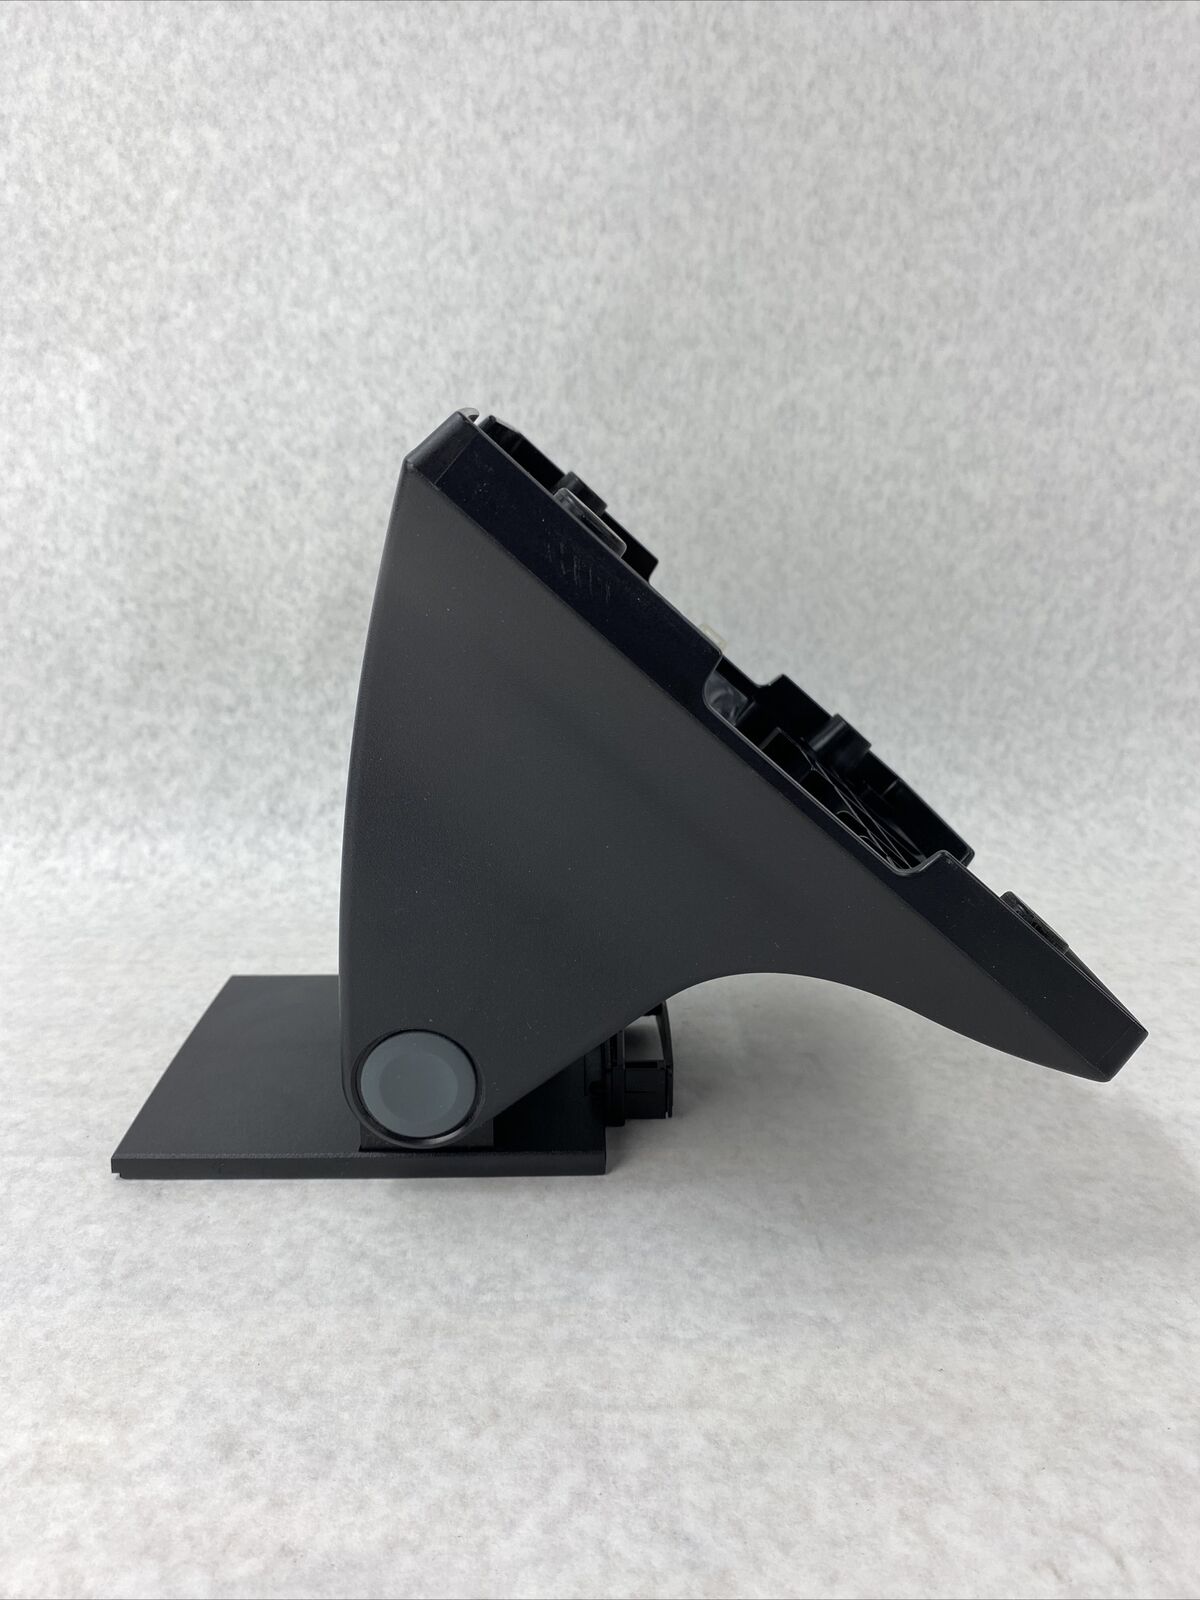 Par M5150 Adjustable Point of Sale Touchscreen Monitor Stand No Adapter